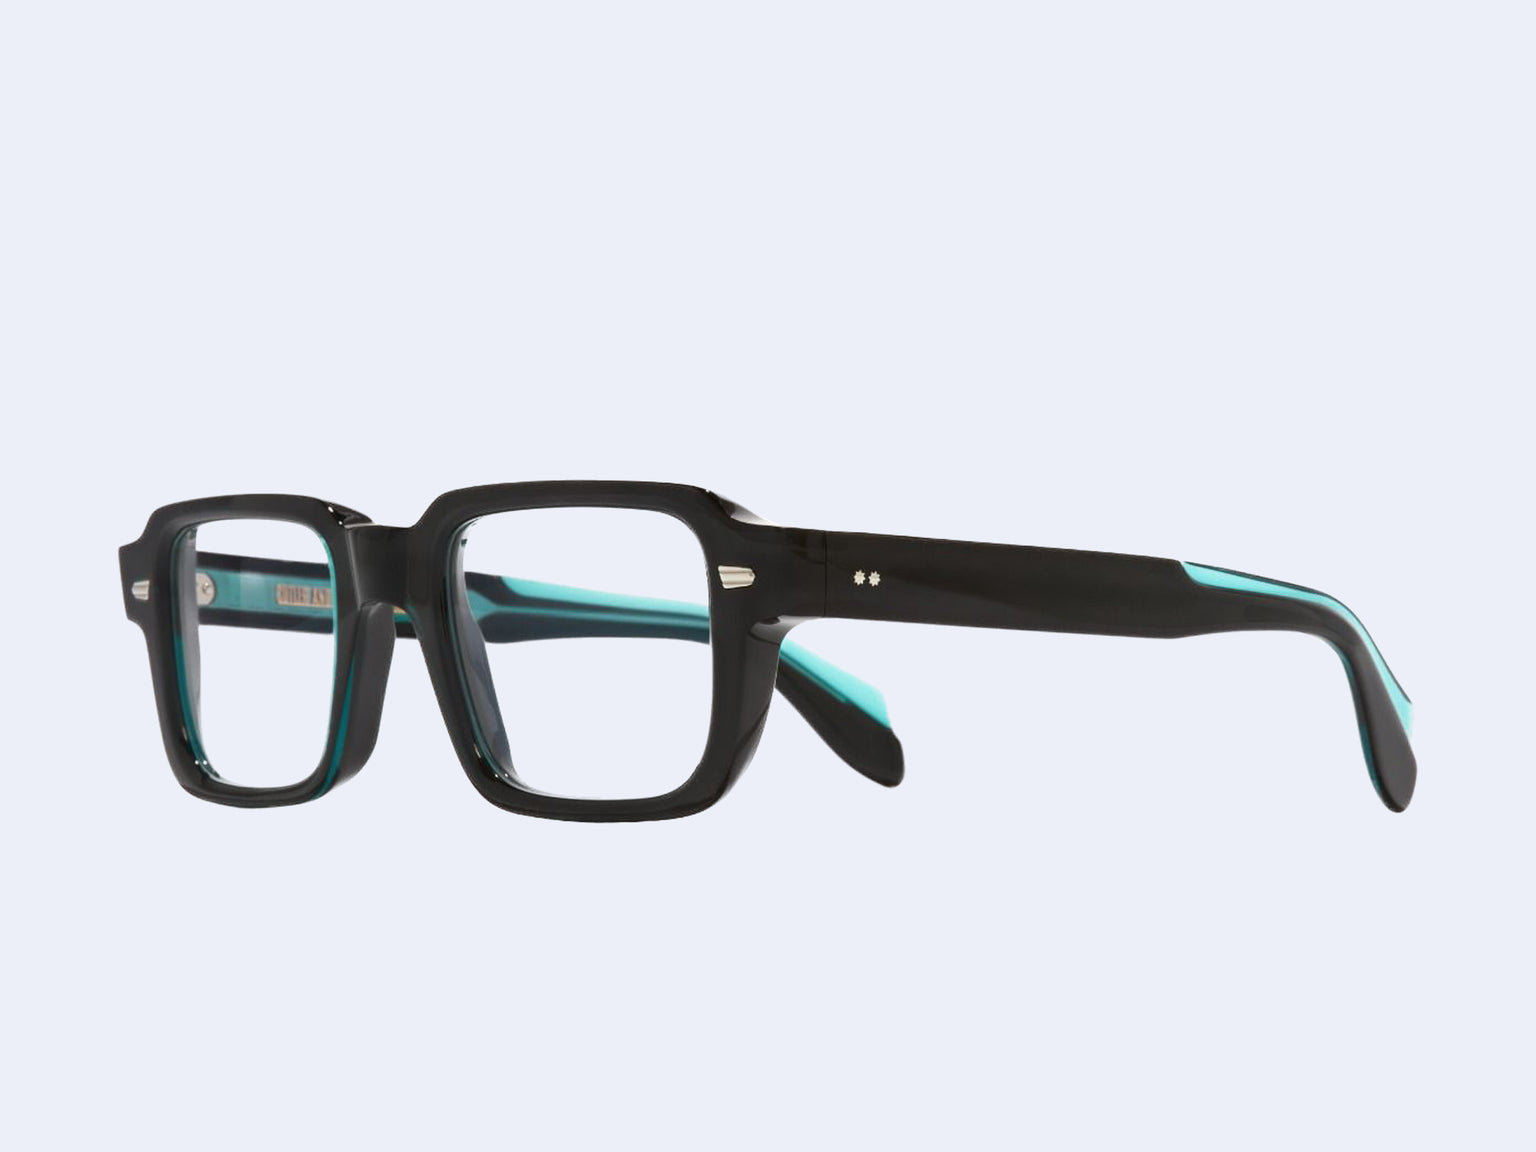 Cutler and Gross 1393 Square (Teal on Black)